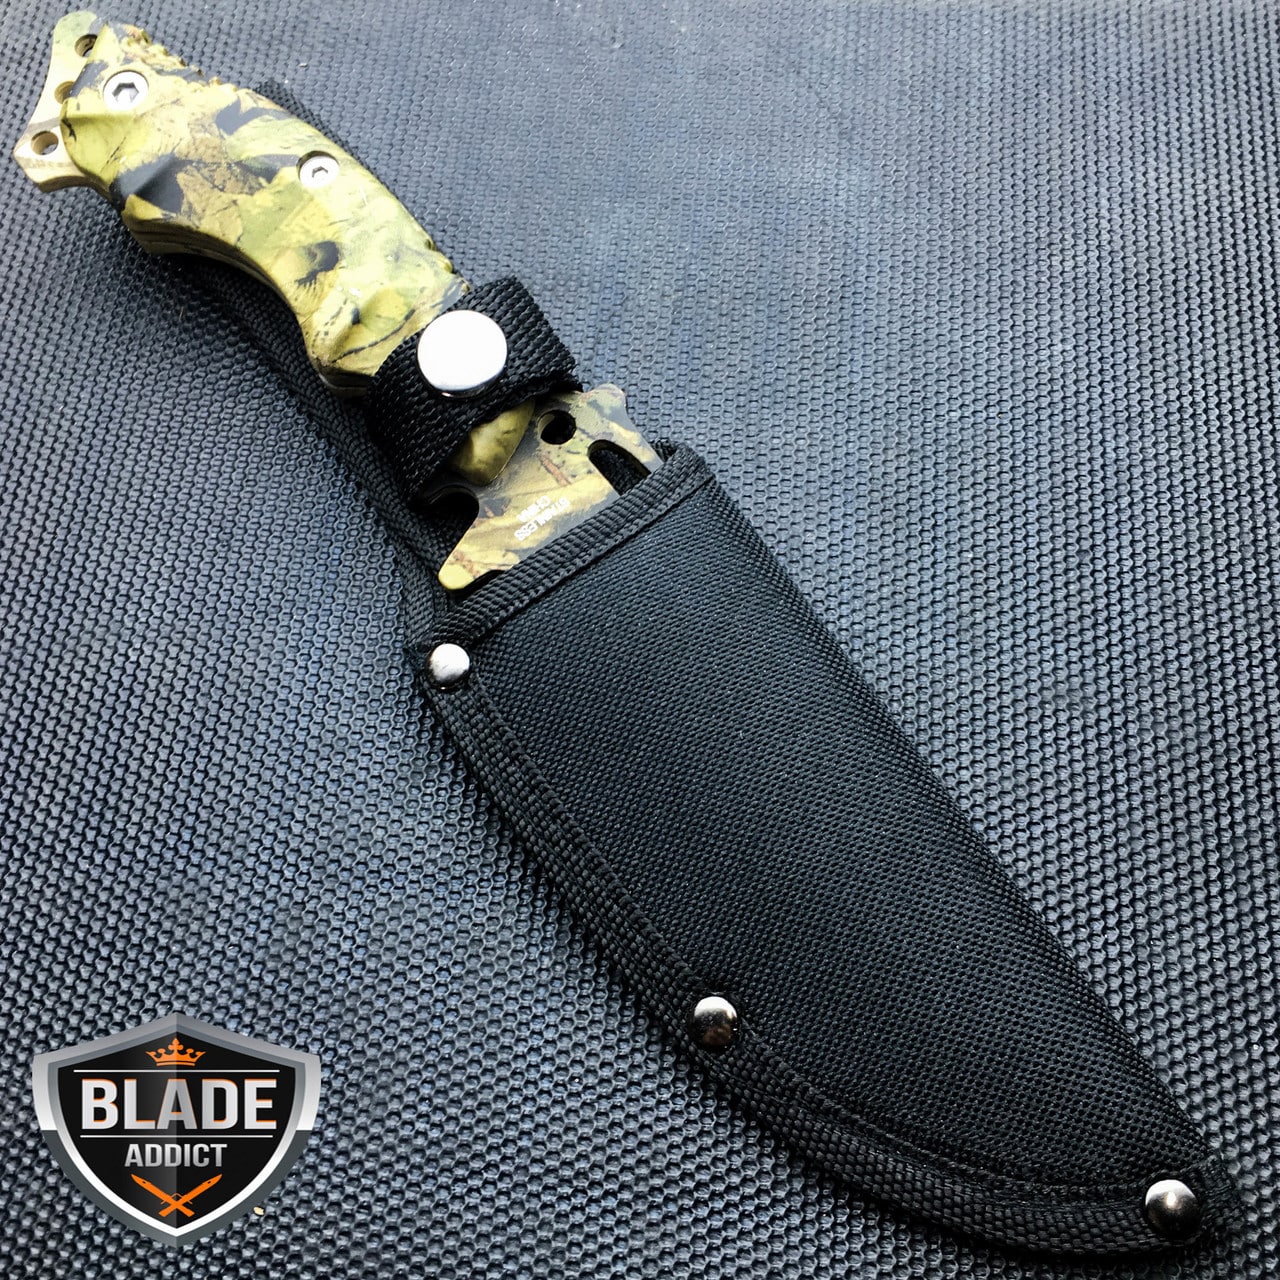 10" Hunting Camo Tactical Combat Survival FIXED BLADE Camping Knife Bowie Rambo